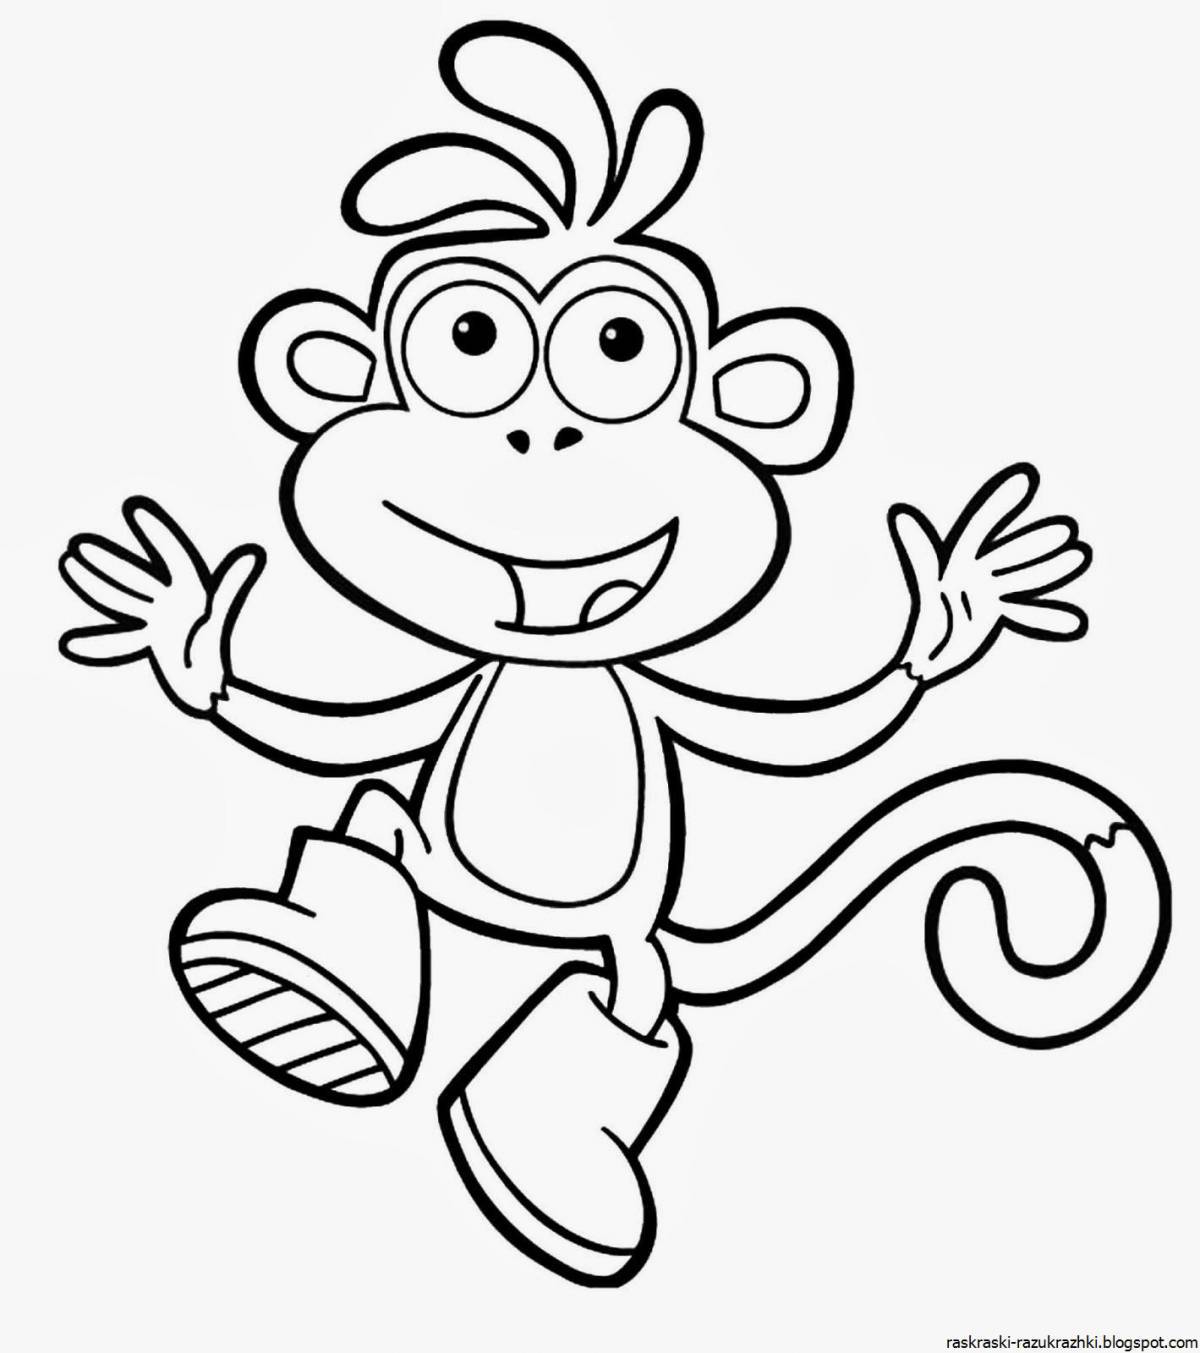 Charming monkey coloring book